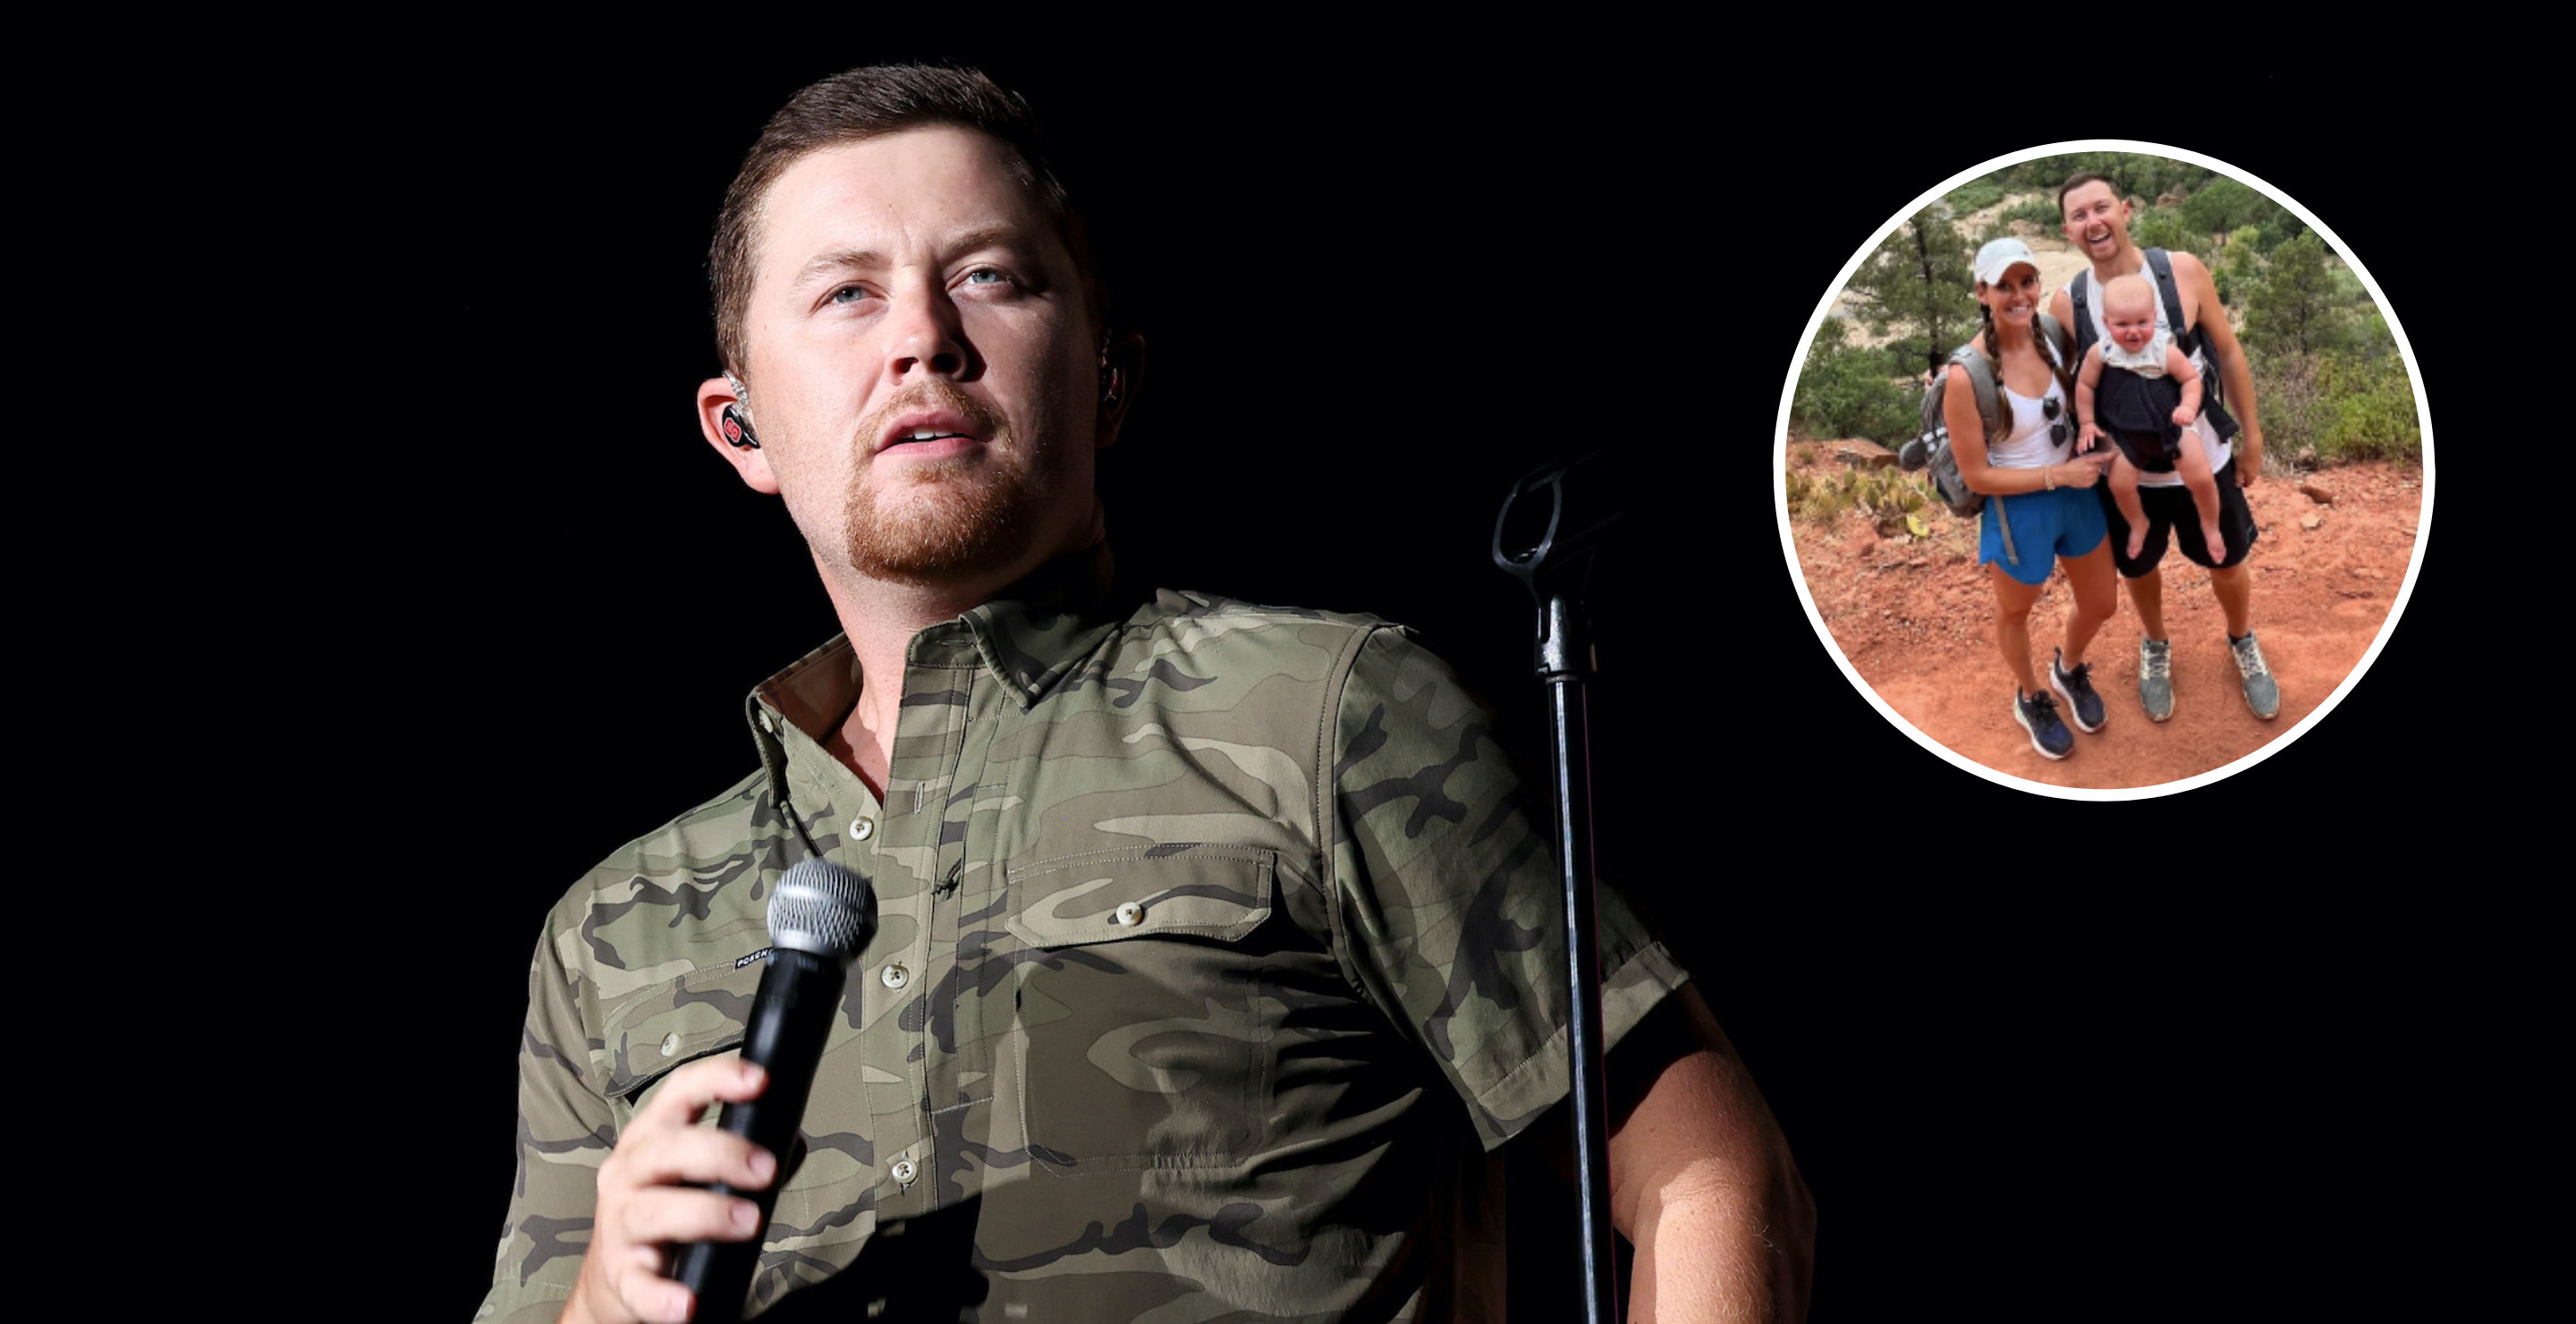 NASHVILLE, TENNESSEE - AUGUST 23: Scotty McCreery performs during the ACM Party For A Cause at Ascend Amphitheater on August 23, 2022 in Nashville, Tennessee and sceeengrab from McCreery's Instagram.